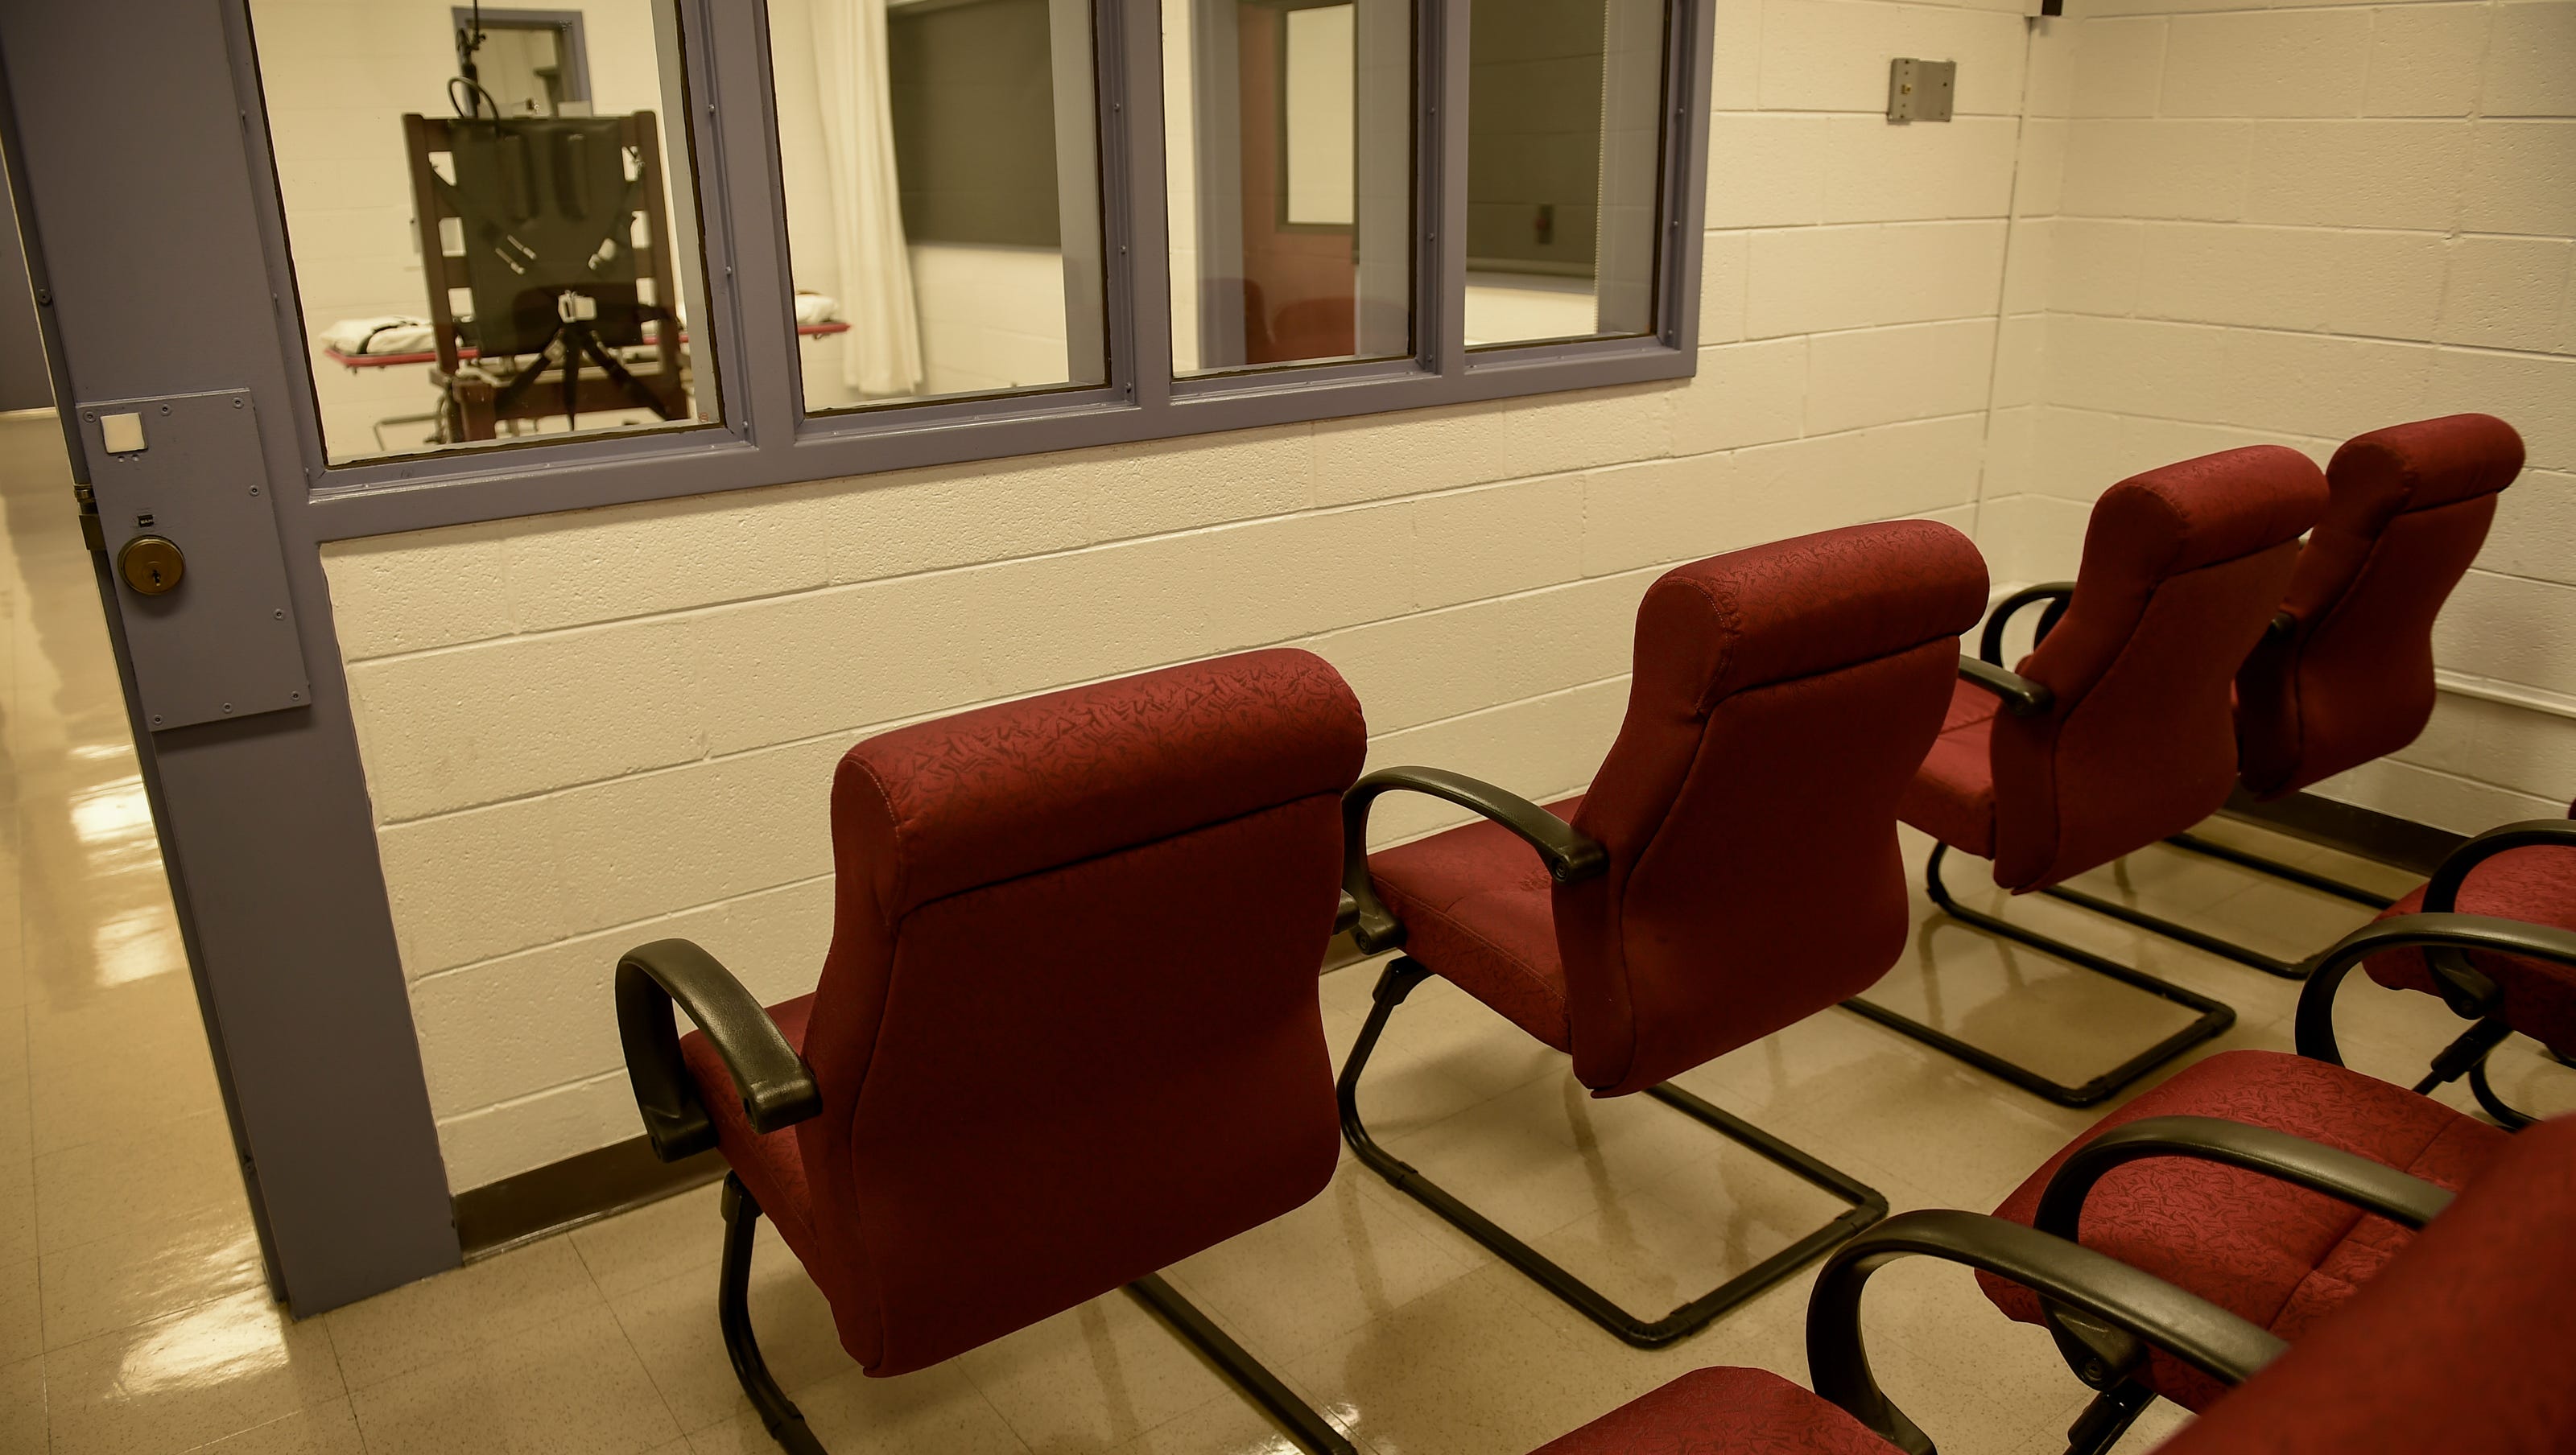 What to know about the electric chair used in Tennessee executions